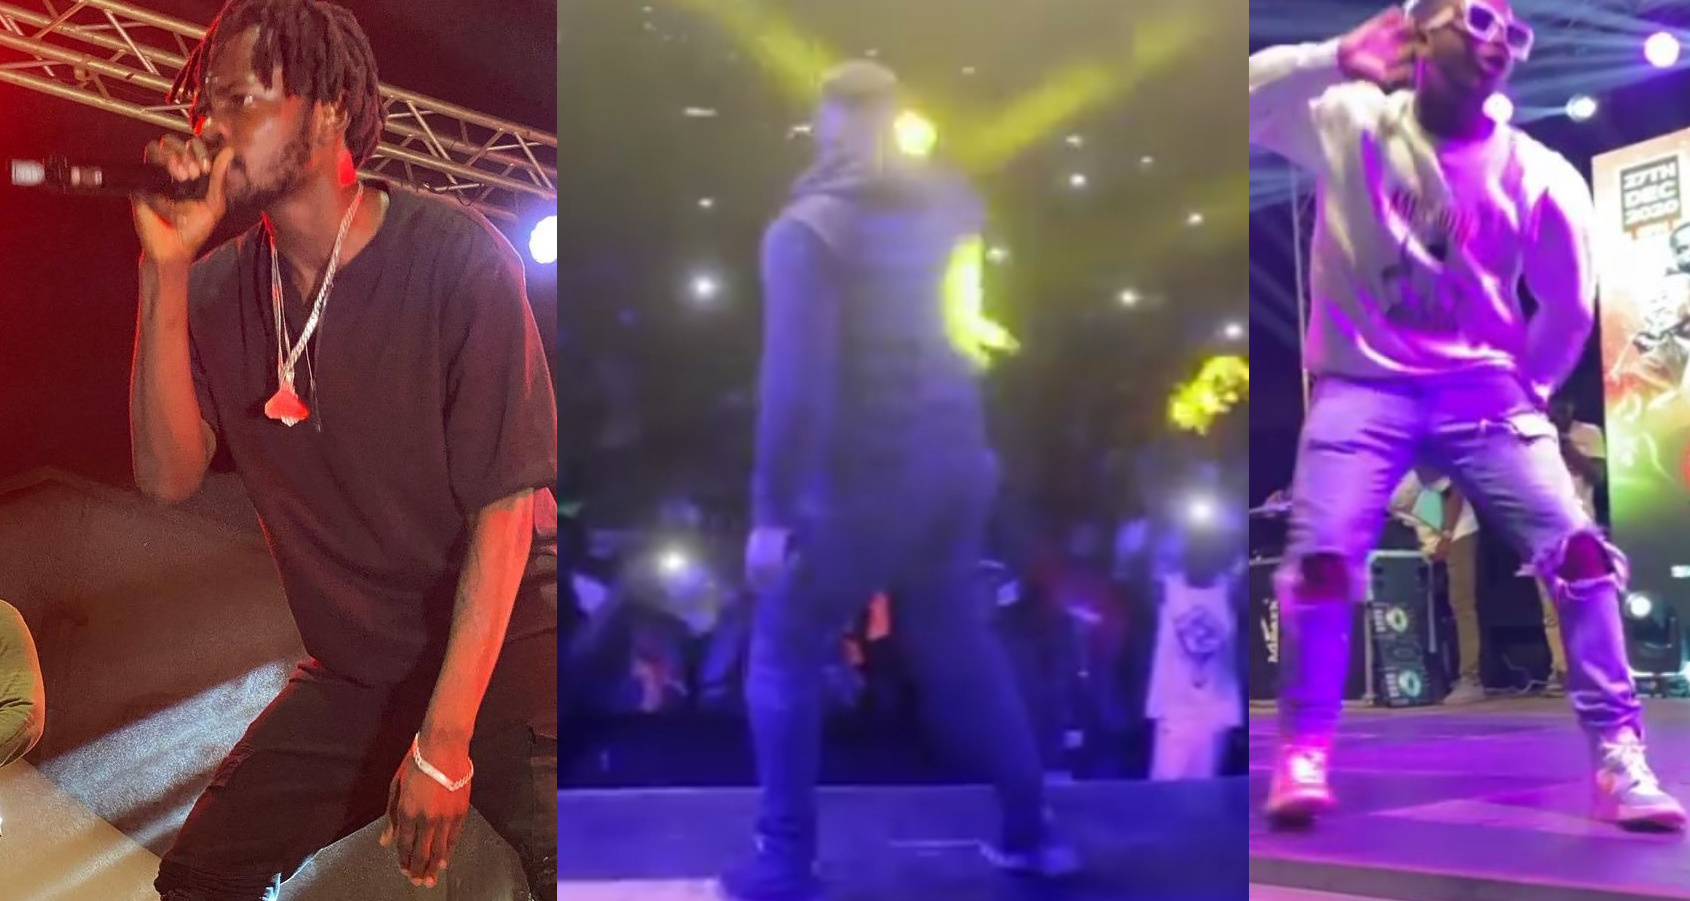 Massive Performances at Fameye's Family Concert (Watch Video)